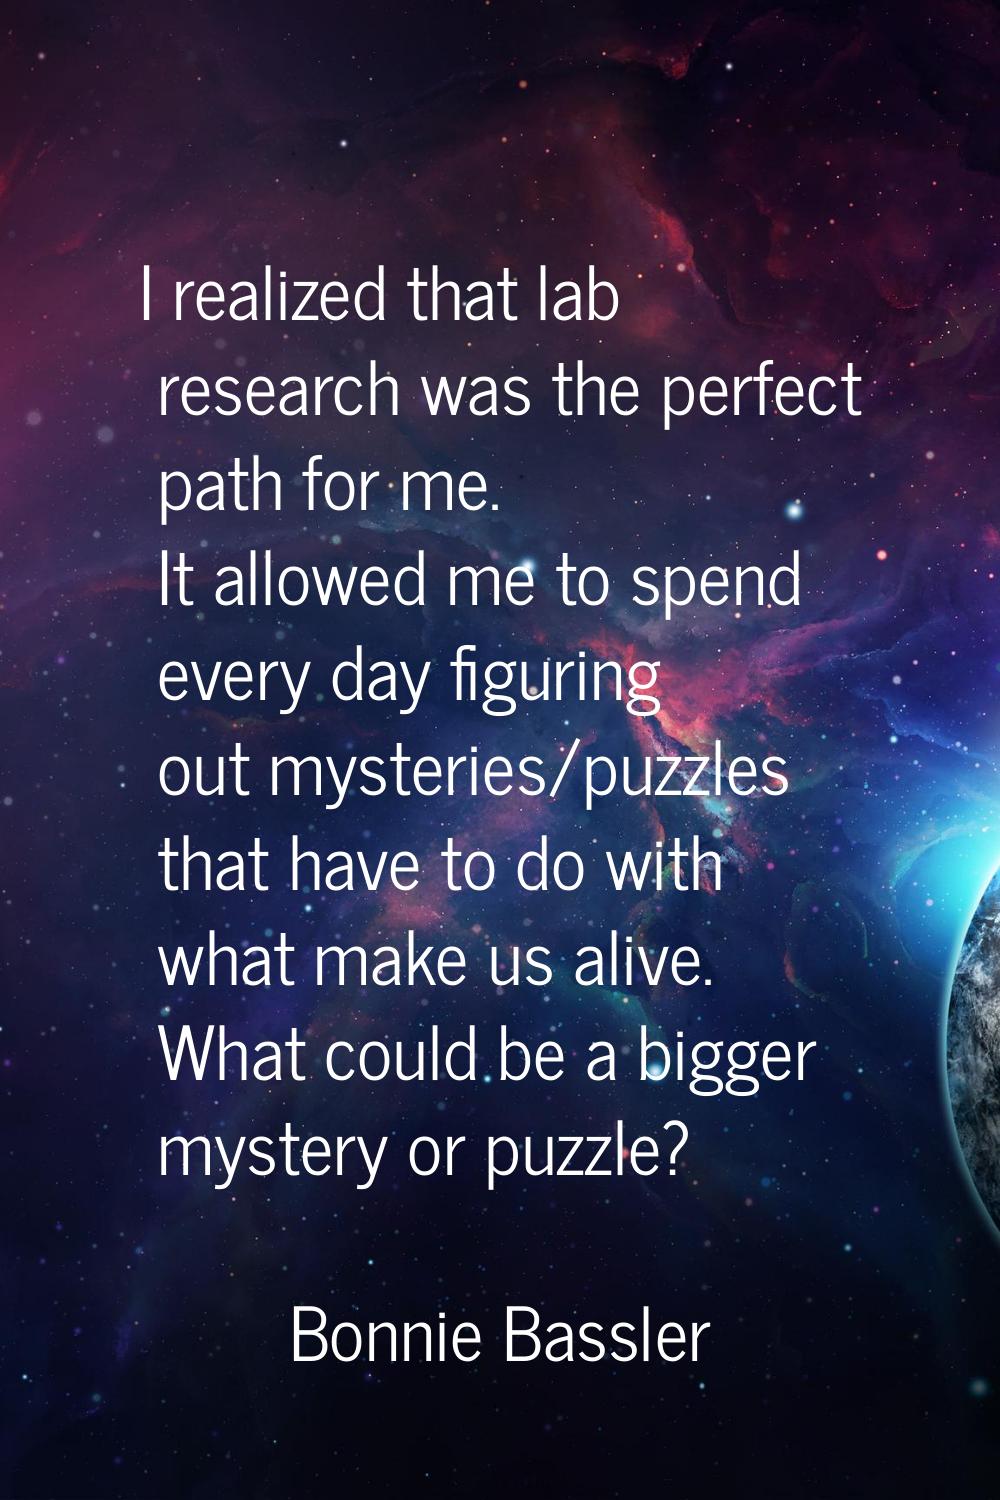 I realized that lab research was the perfect path for me. It allowed me to spend every day figuring